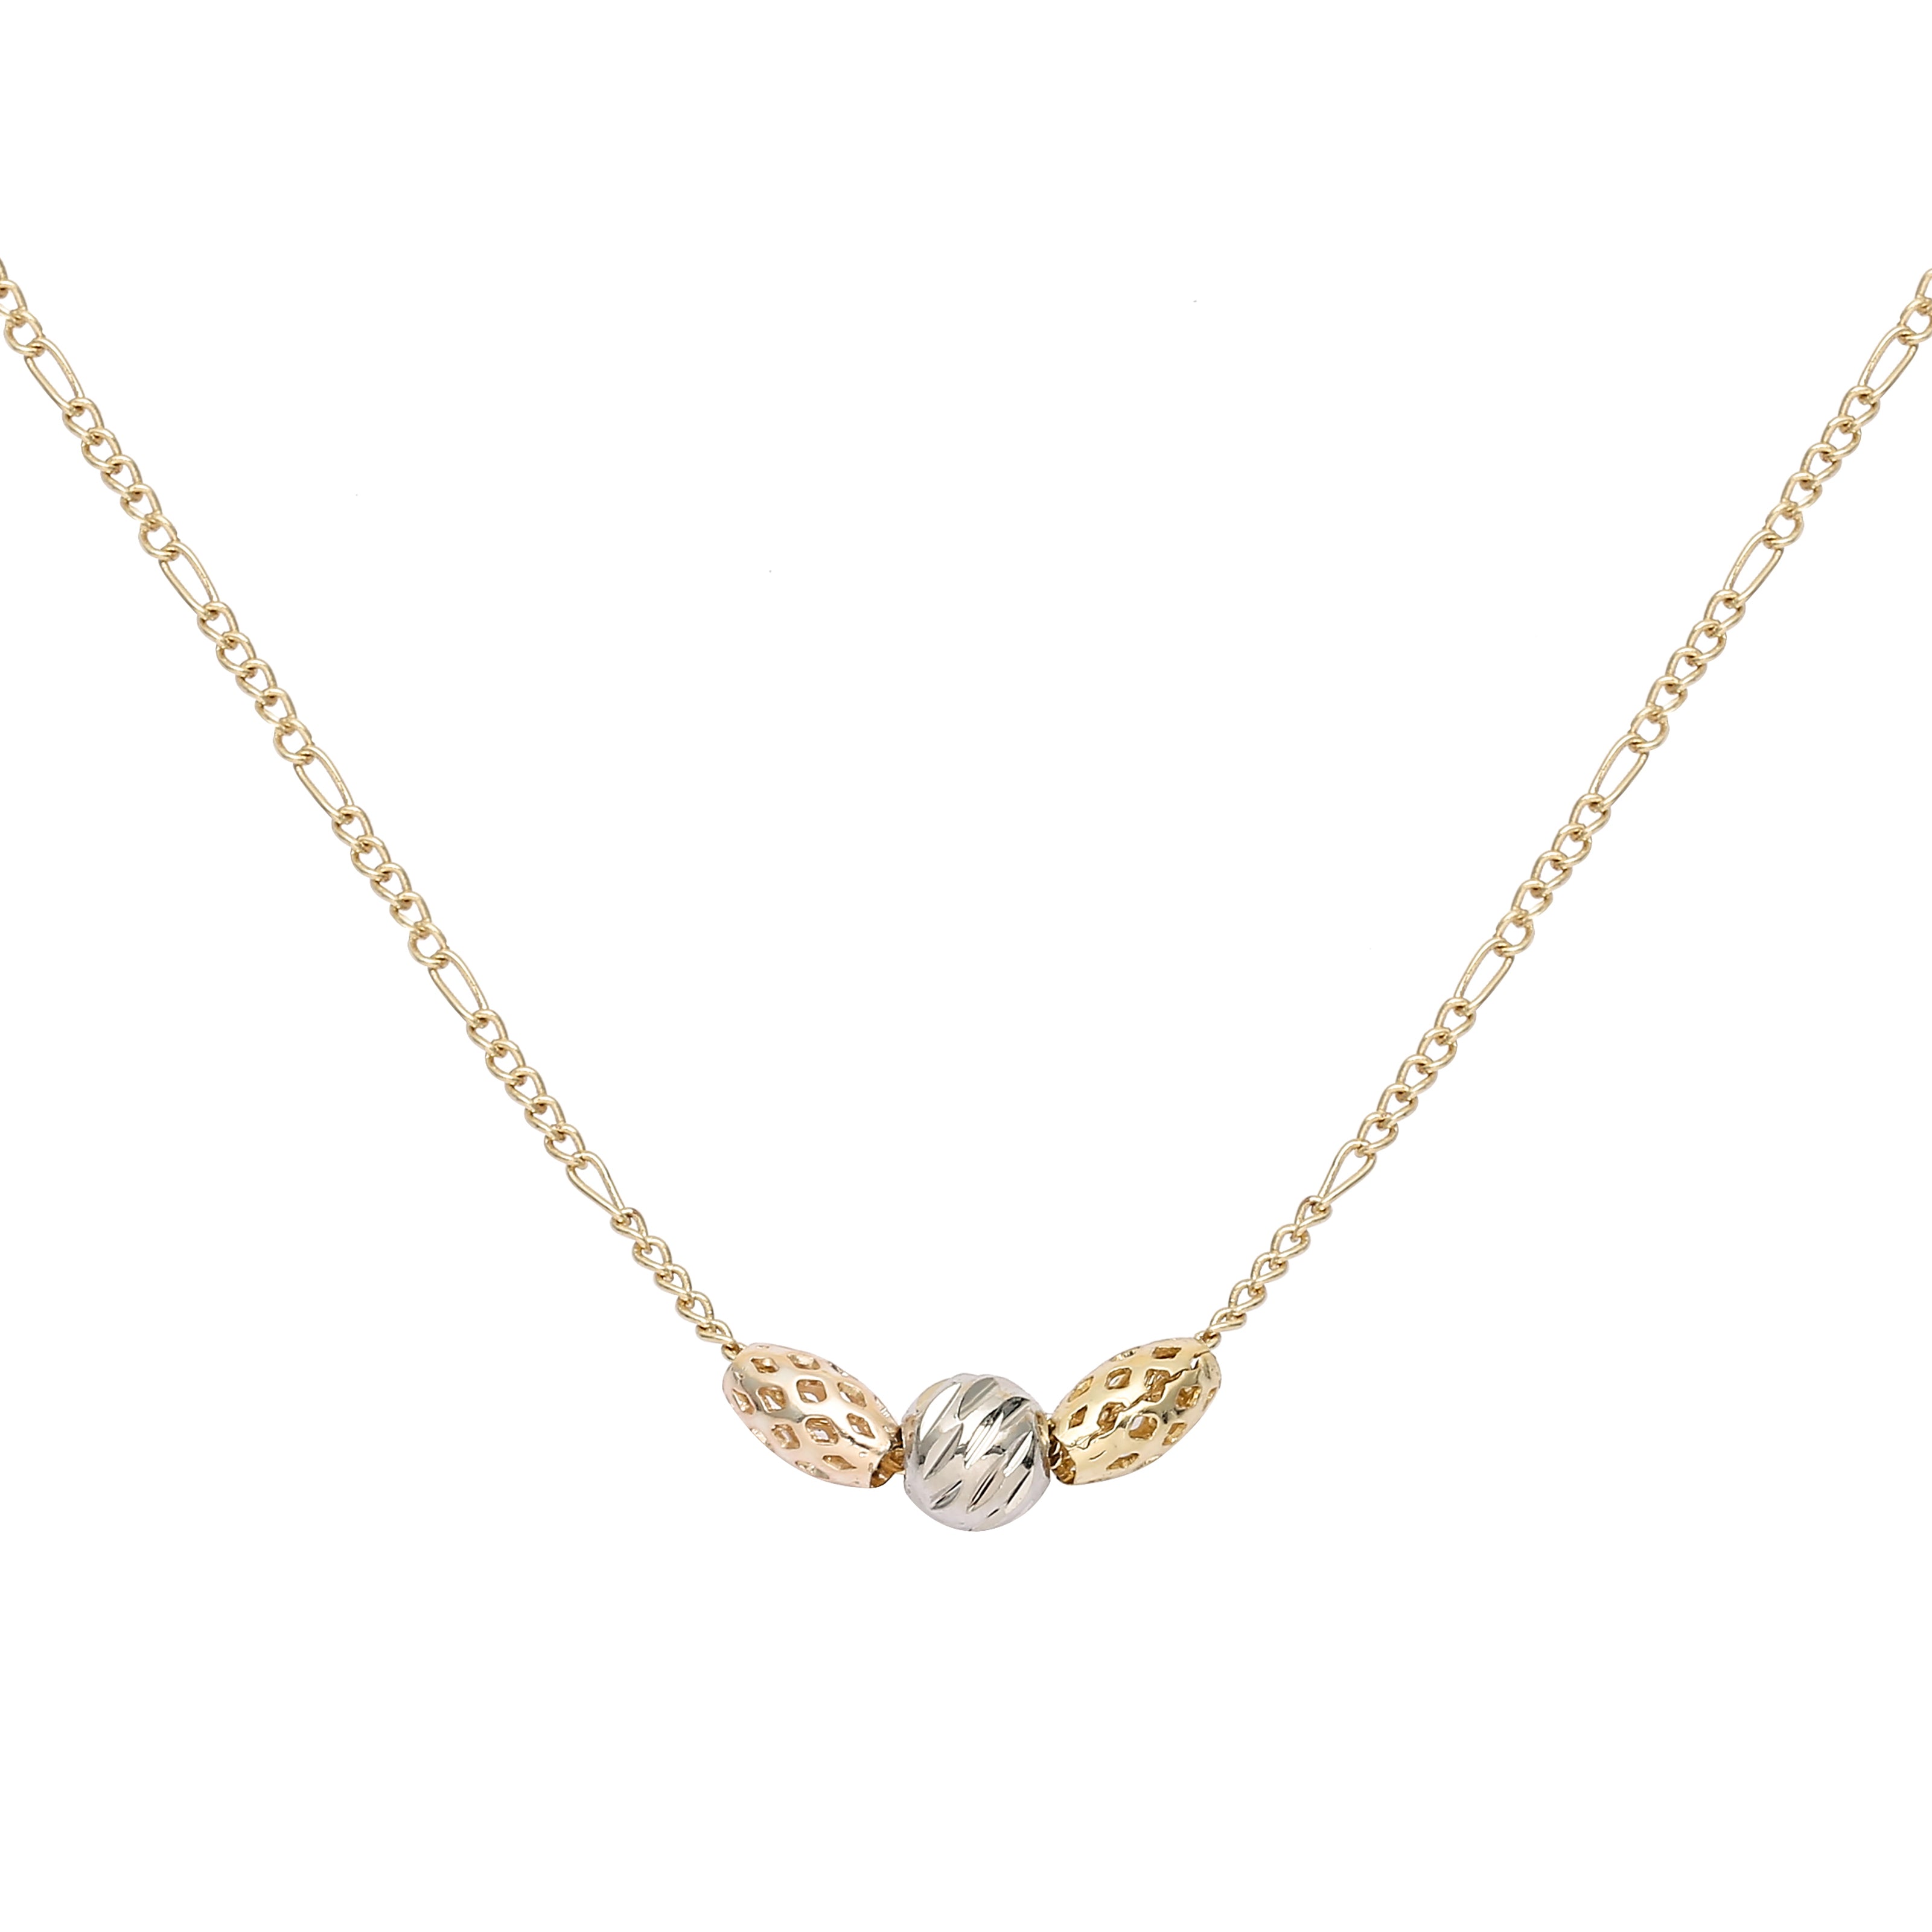 Three beads 14K Gold two tone Necklace